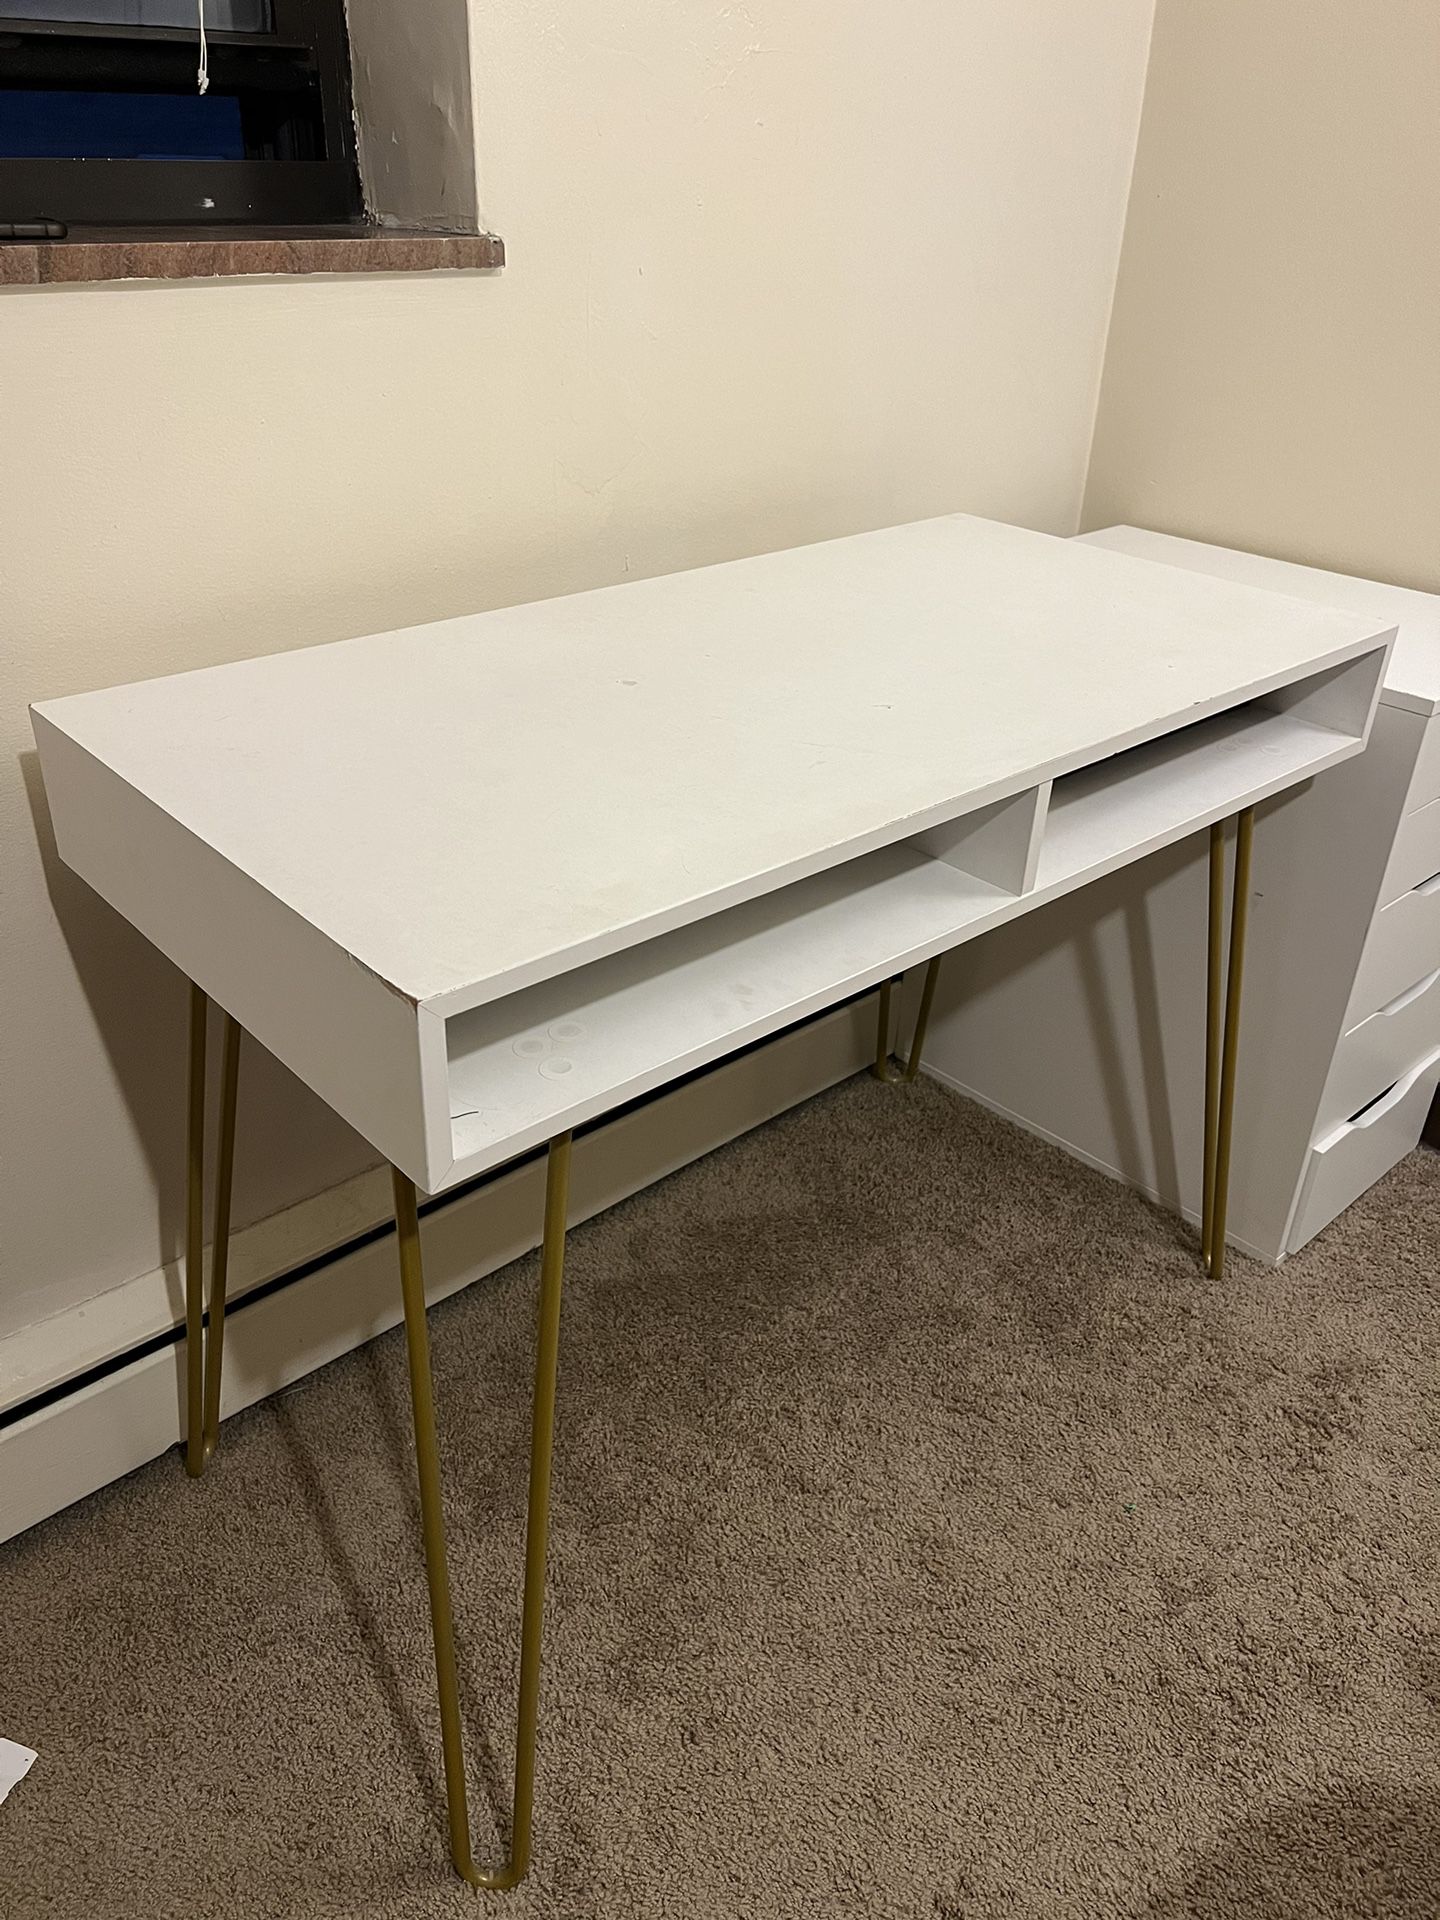 White Desk With Gold Legs 